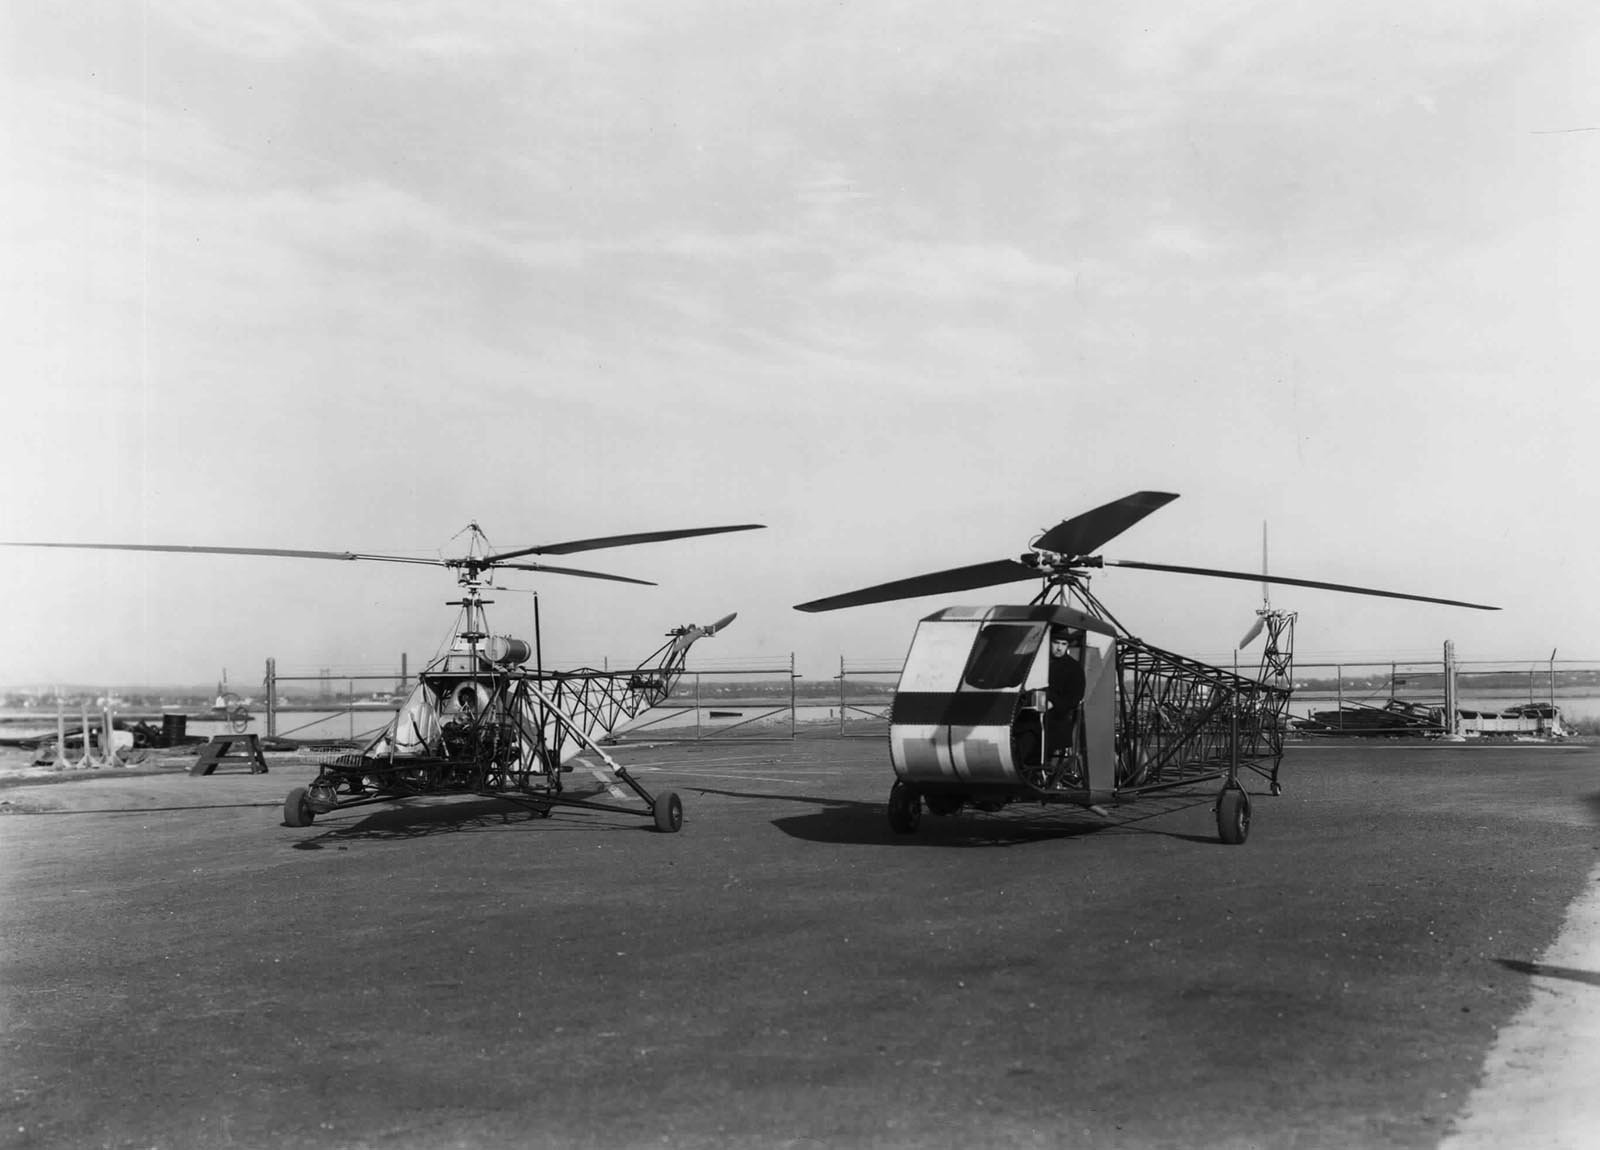 The VS-300A alongside the XR-4, with Igor Sikorsky in the pilot seat, in December 1941.